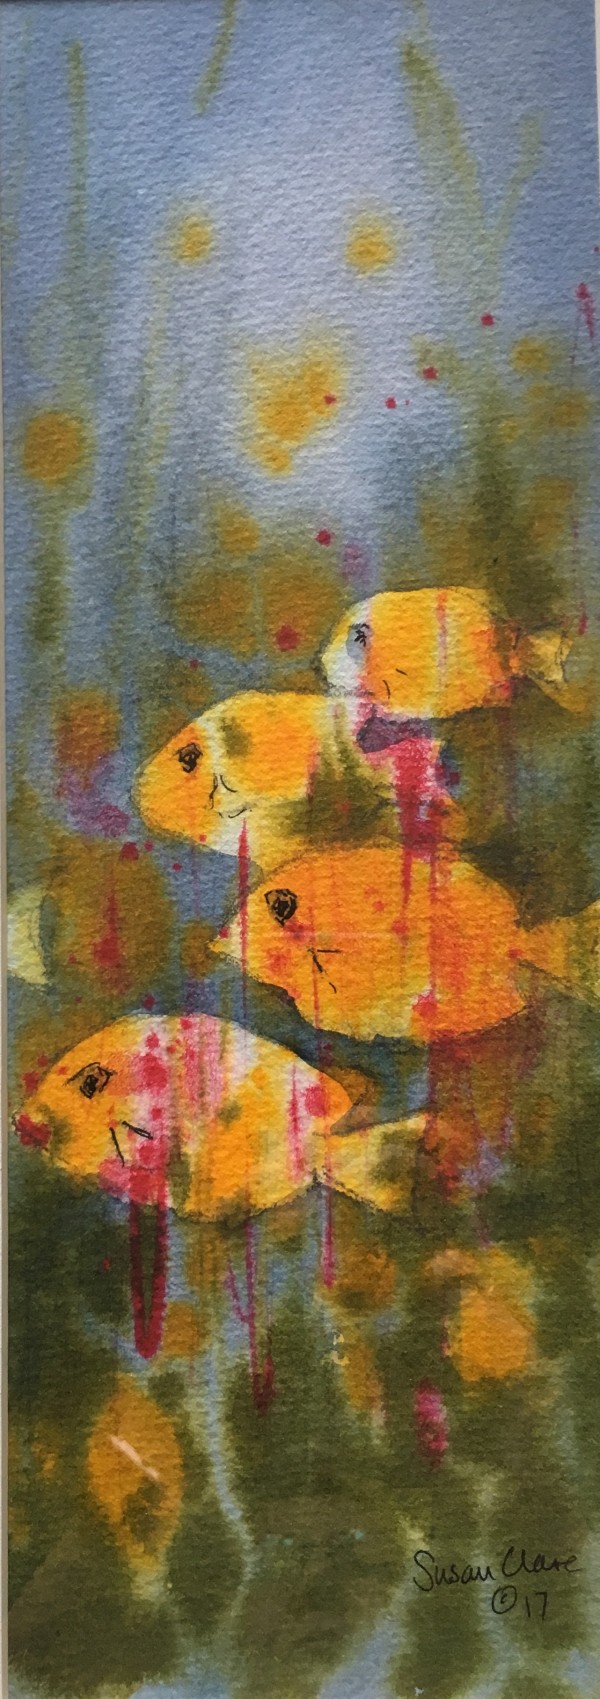 5 Small Fishes by Susan Clare